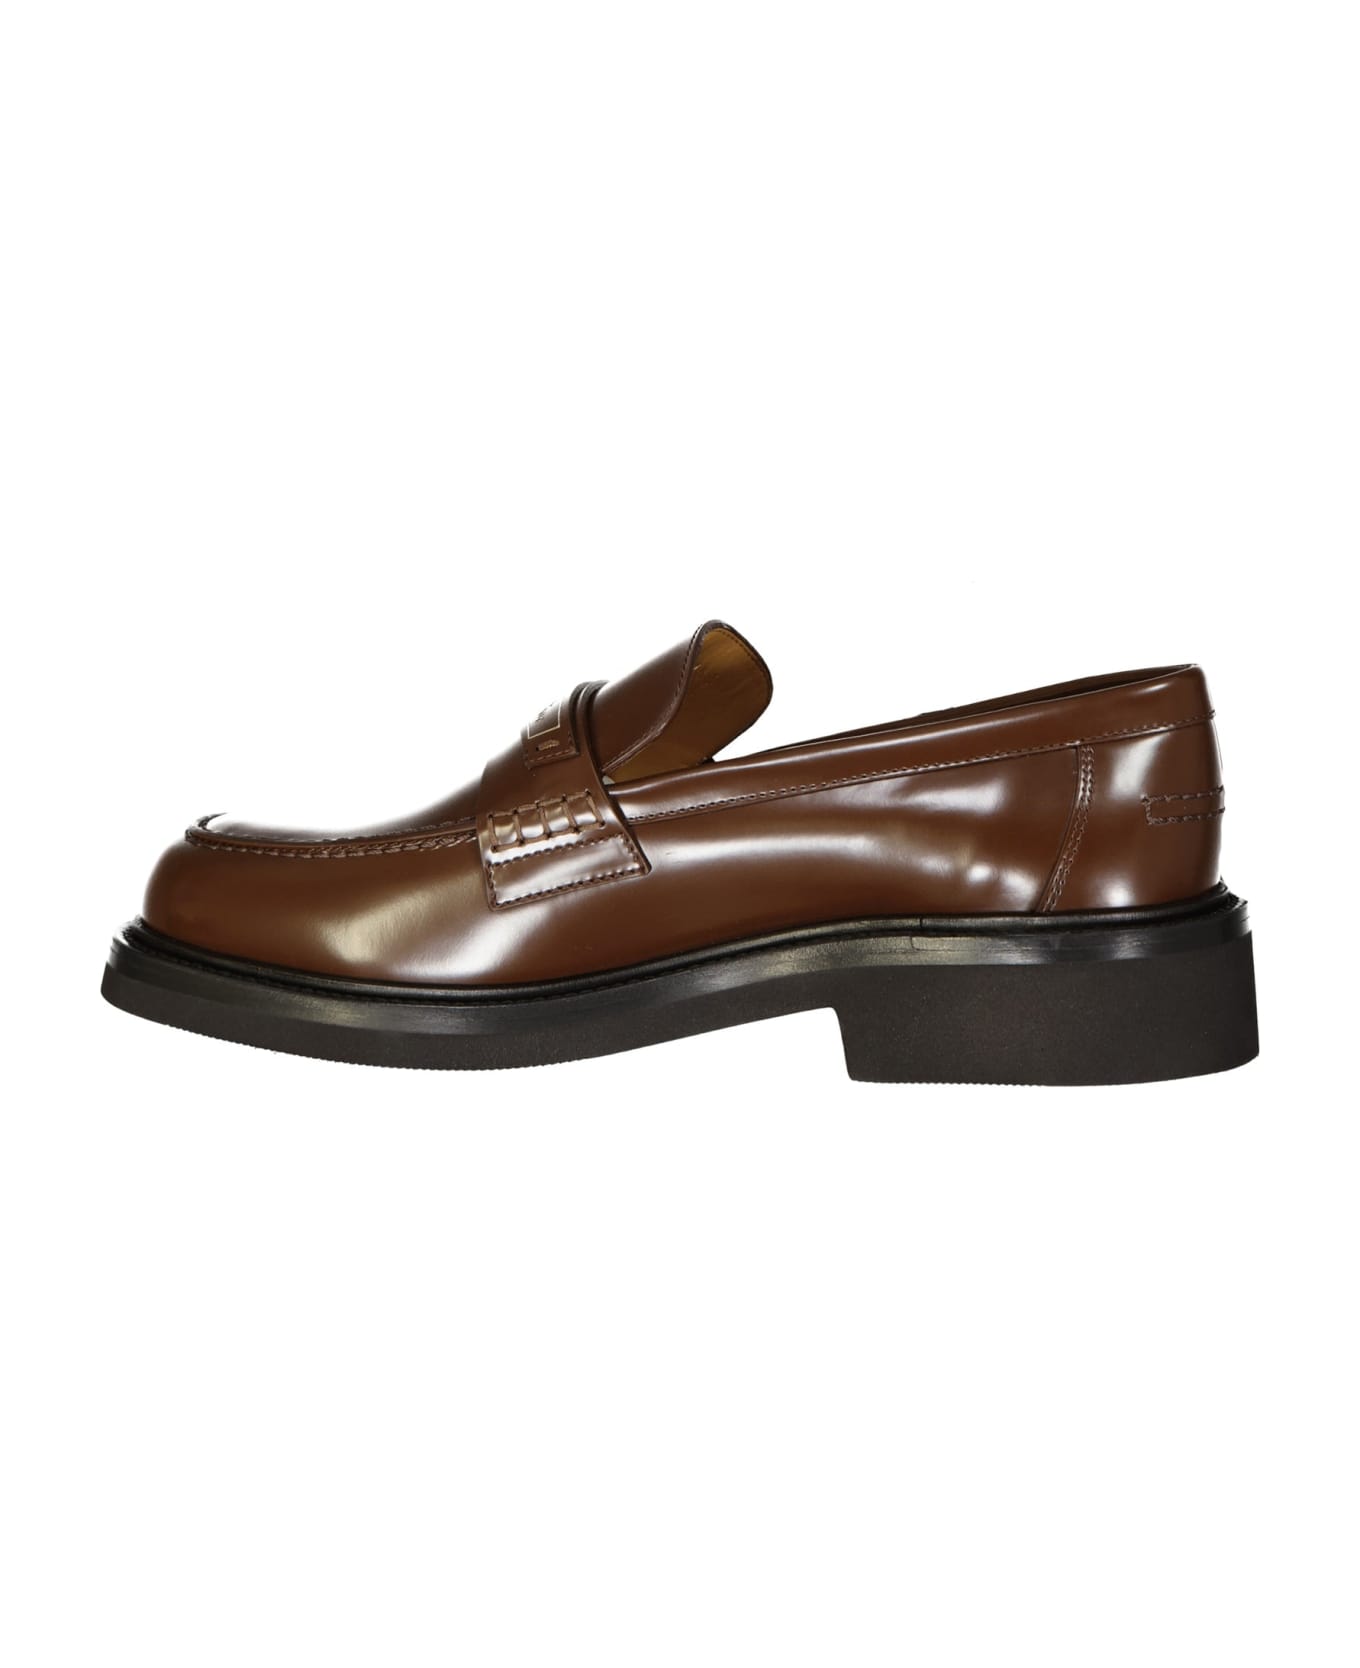 Dior Leather Loafers - Brown